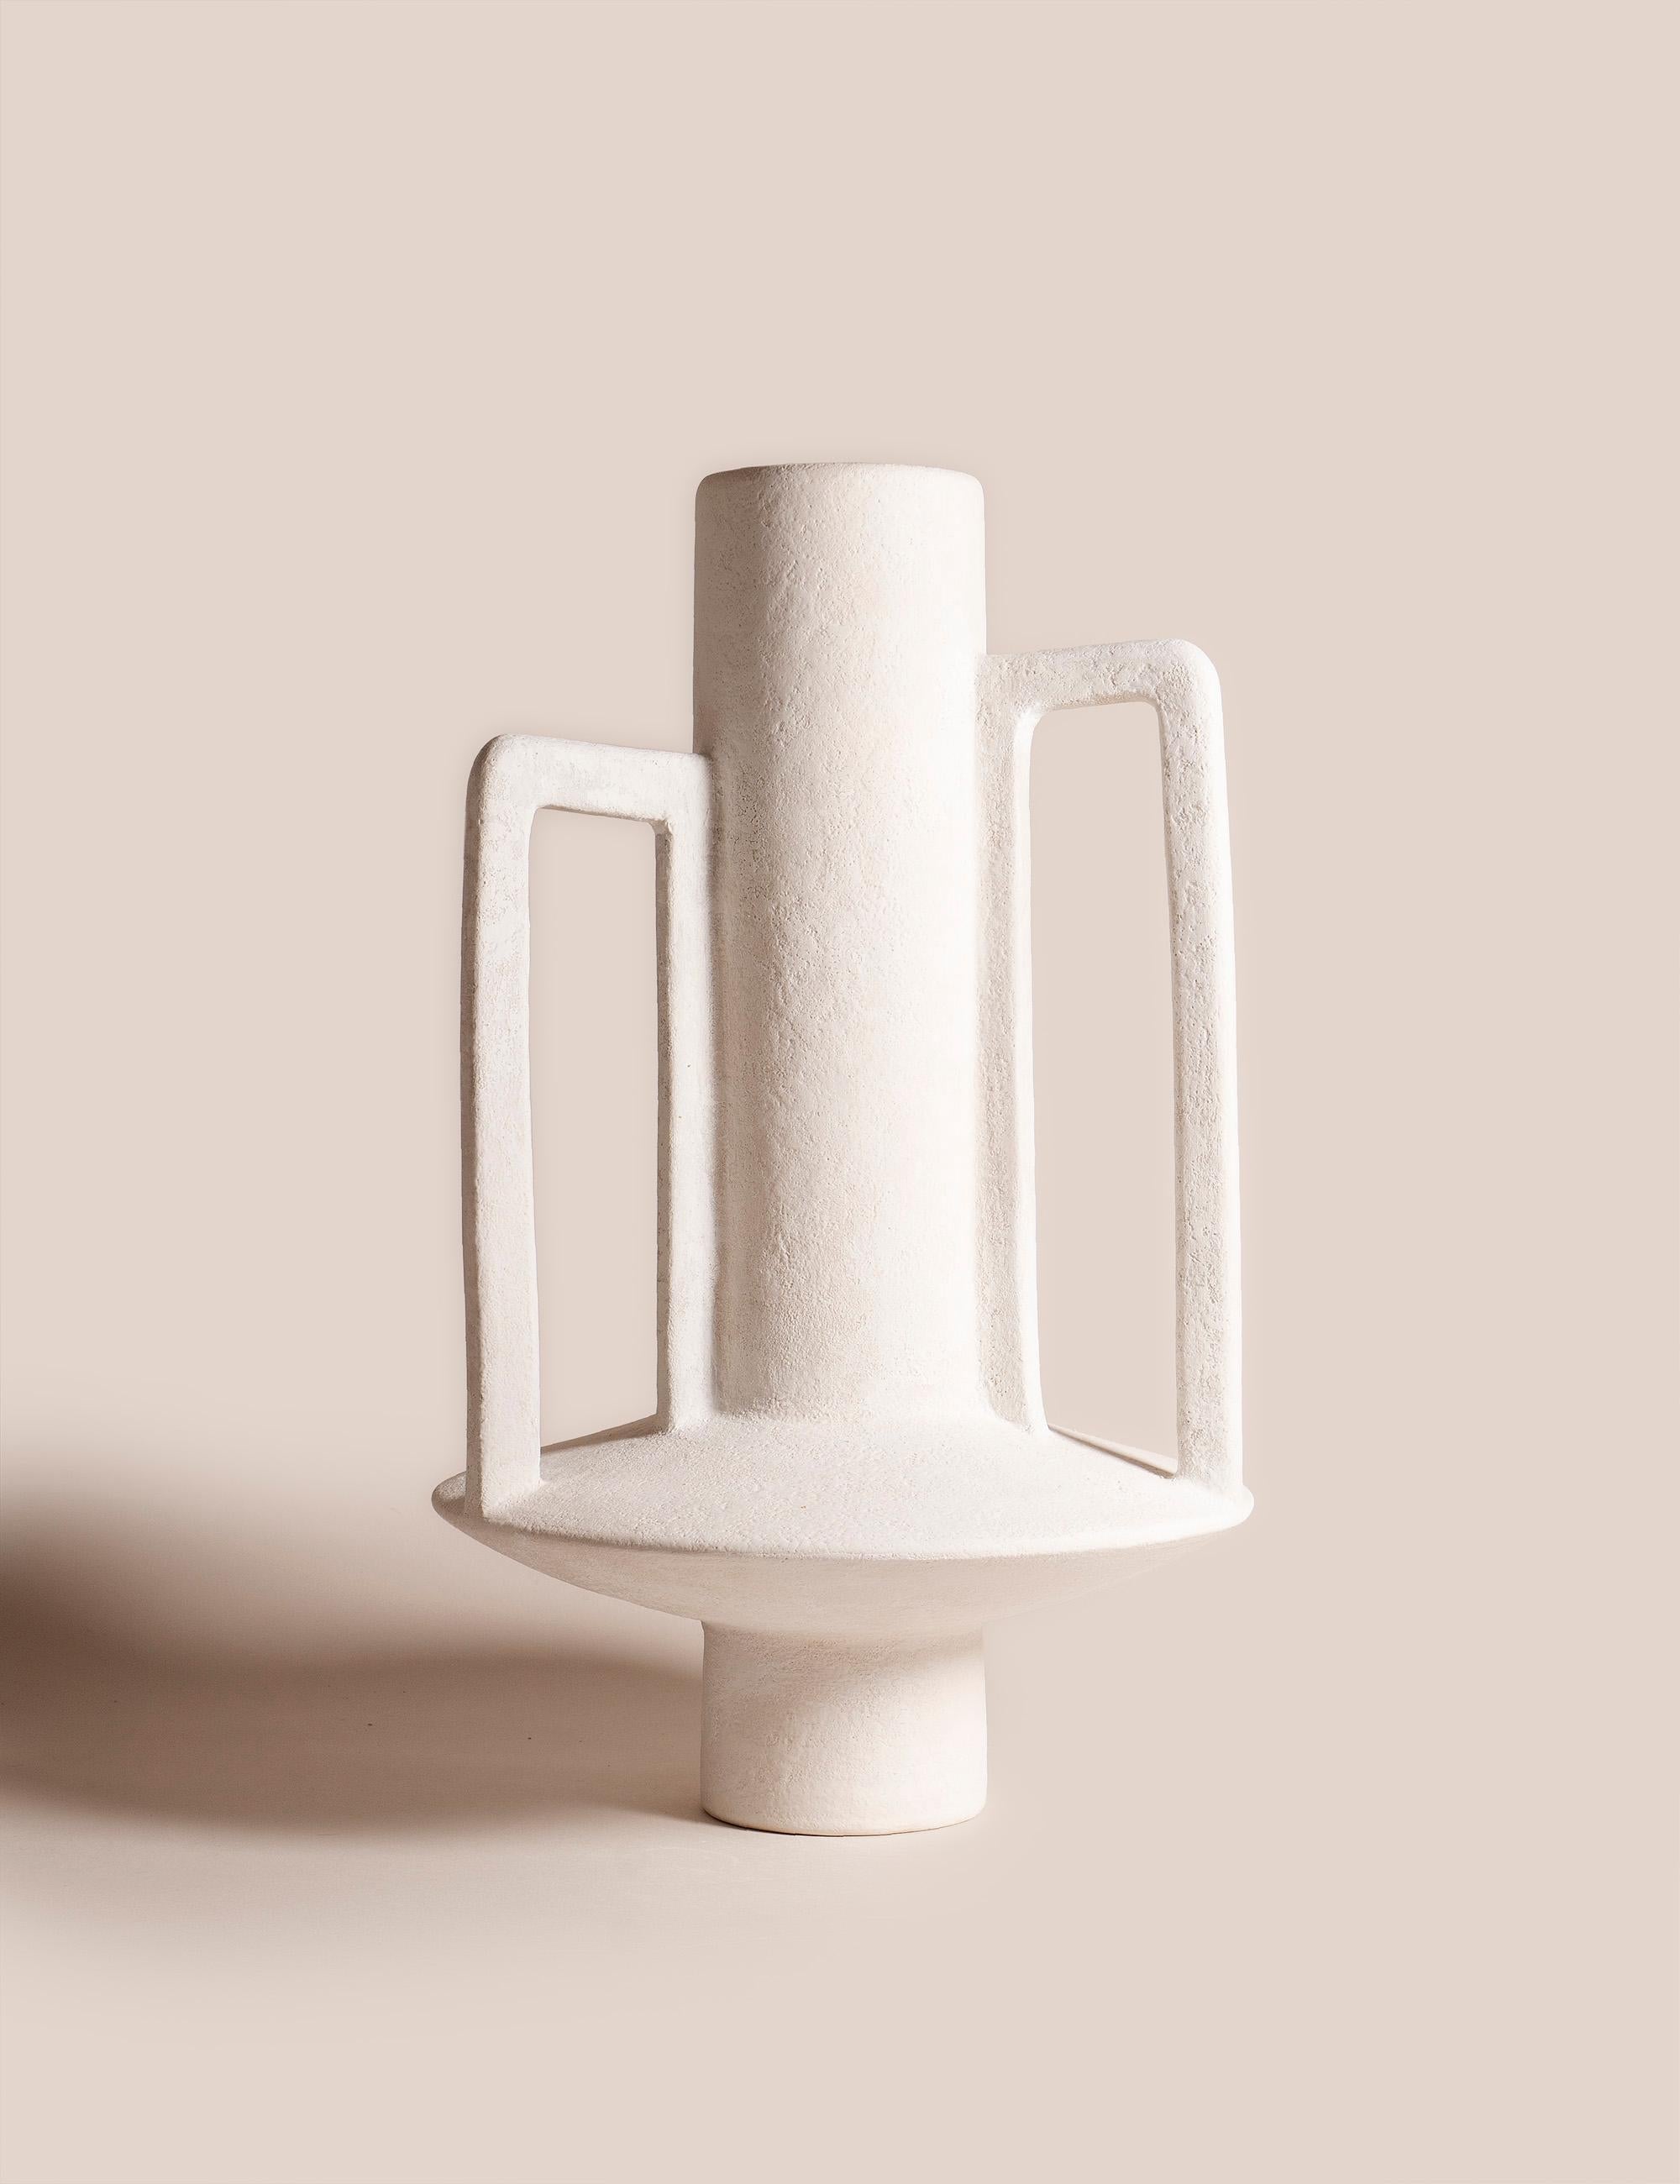 Handcrafted vase 071 by Lovebuch
Dimensions: Ø 25 x H 35 cm
Materials: Sandstone, porcelain, handcrafted piece

Katia works with wood and clay, these raw, powerfully expressive materials are shaped to create a poetry of objects that inhabit our